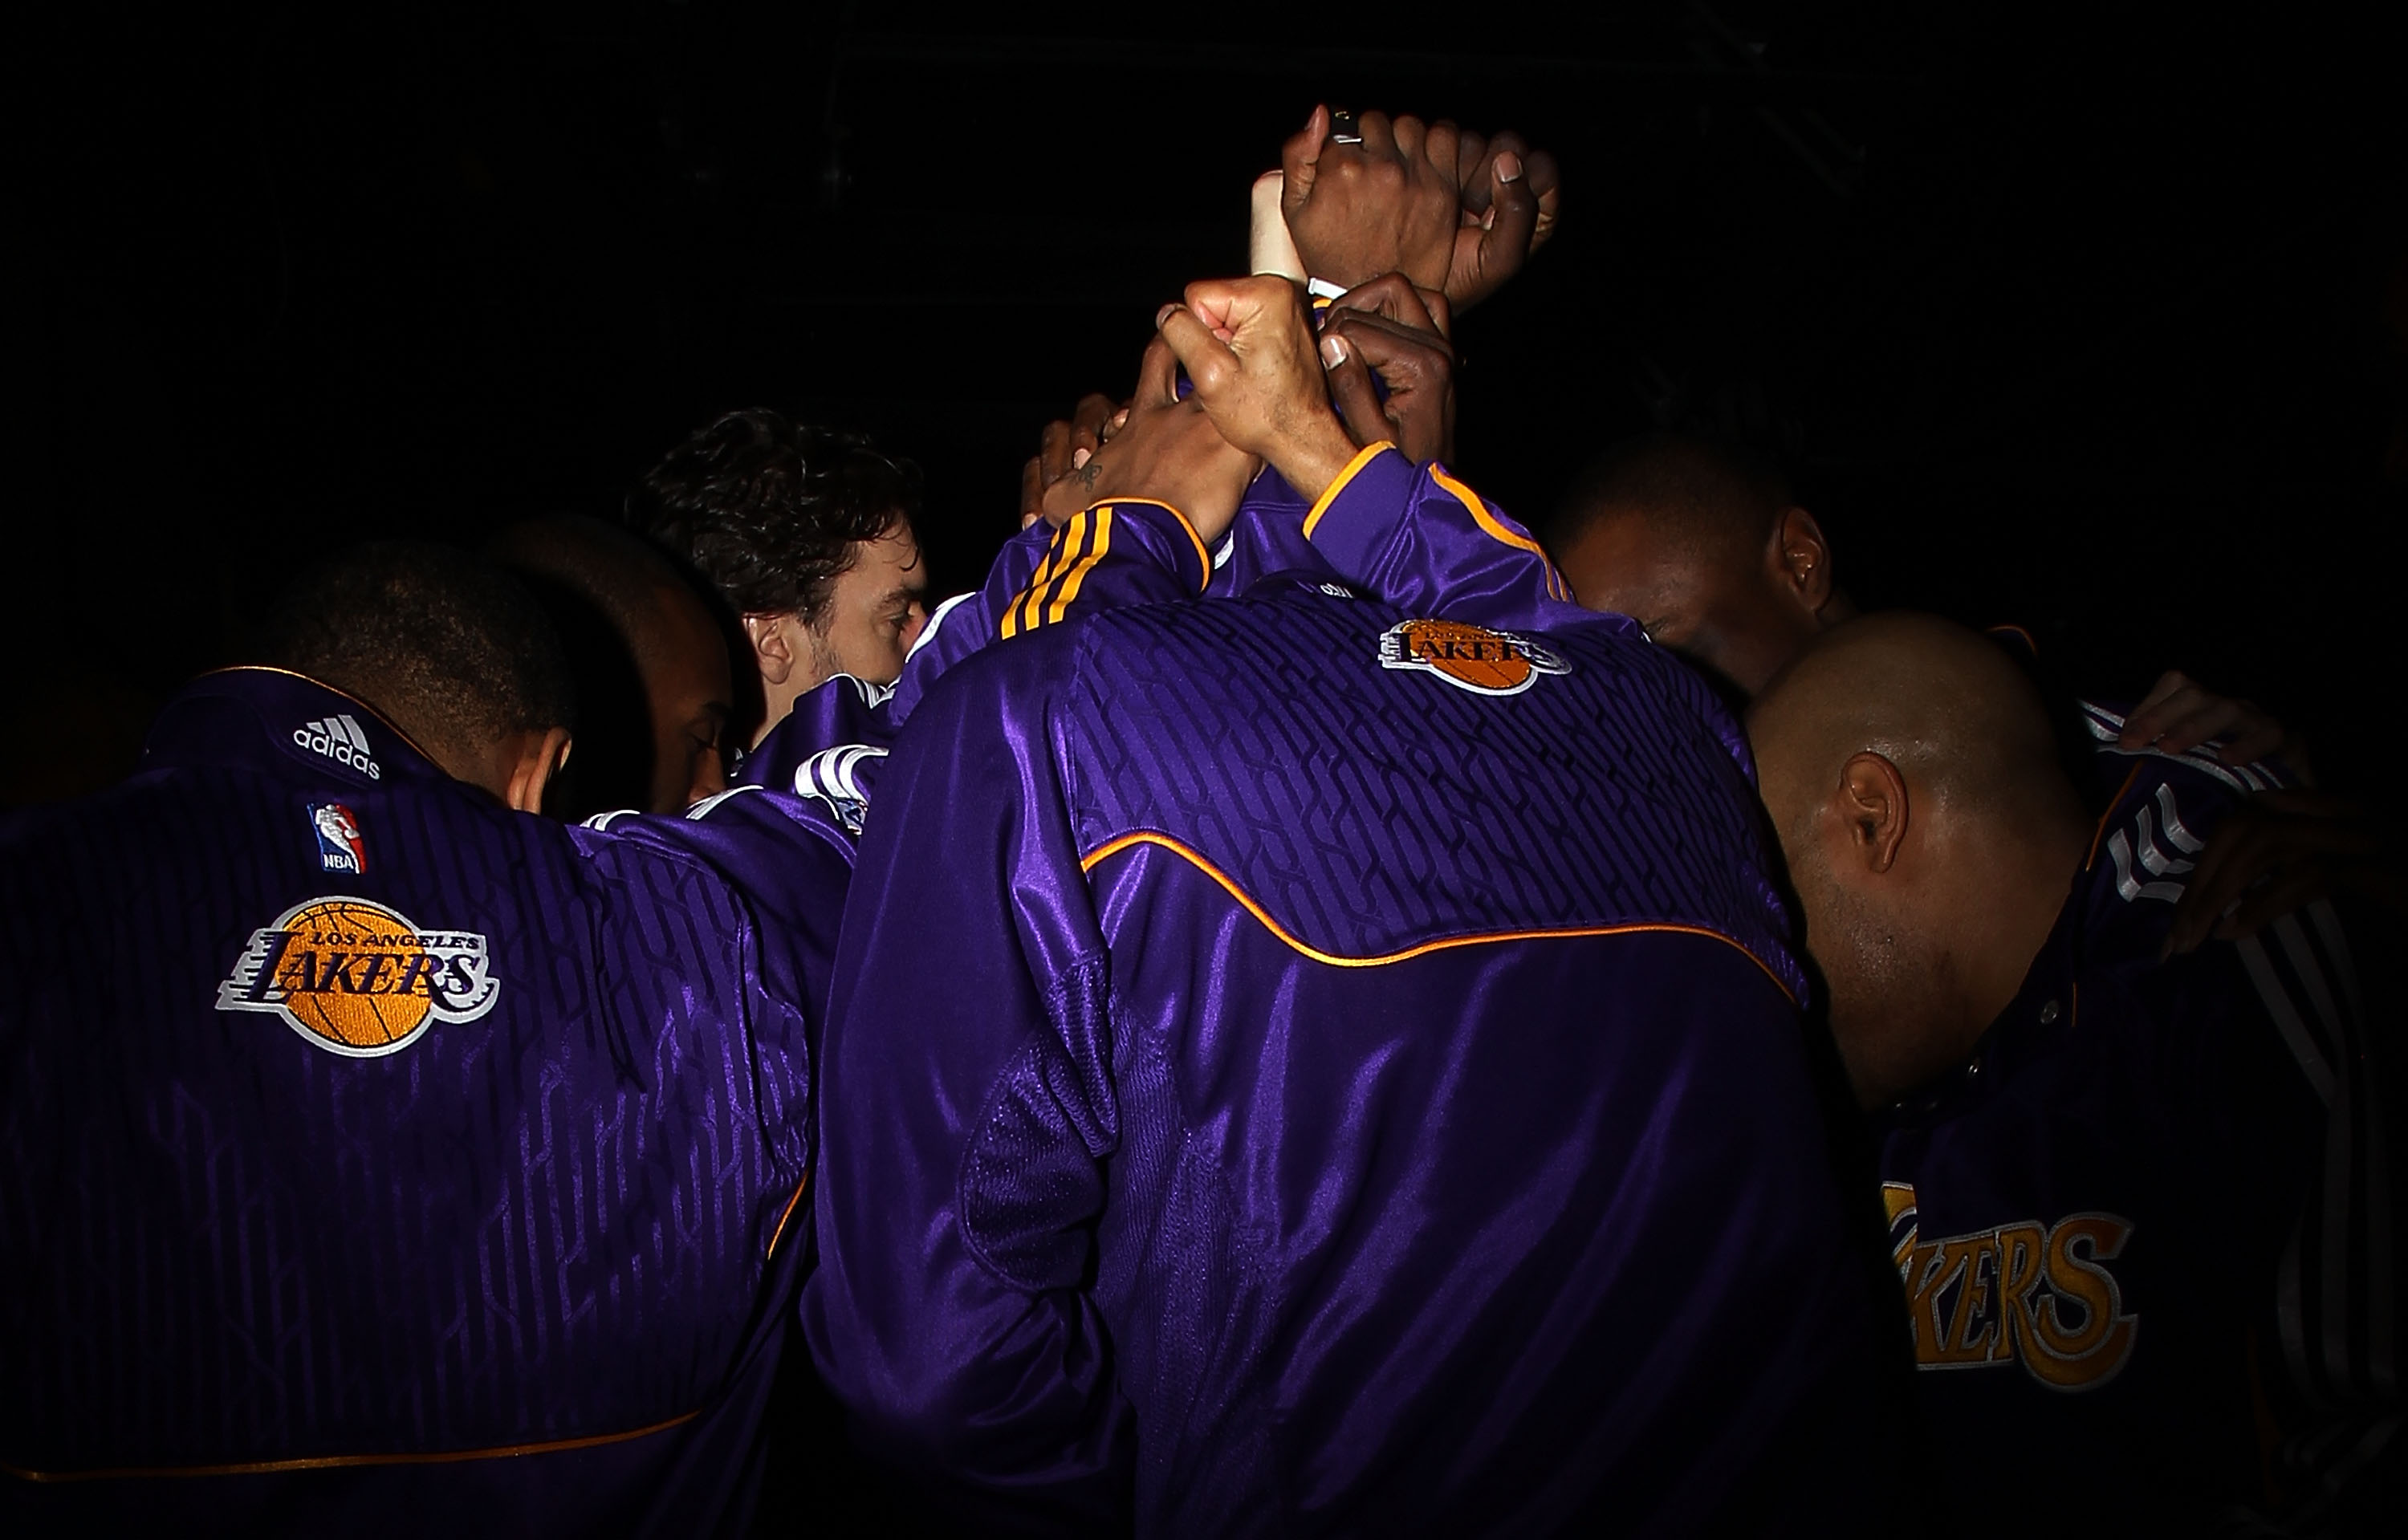 DALLAS, TX - JANUARY 19:  The Los Angeles Lakers huddle before a game against the Dallas Mavericks at American Airlines Center on January 19, 2011 in Dallas, Texas.  NOTE TO USER: User expressly acknowledges and agrees that, by downloading and or using th